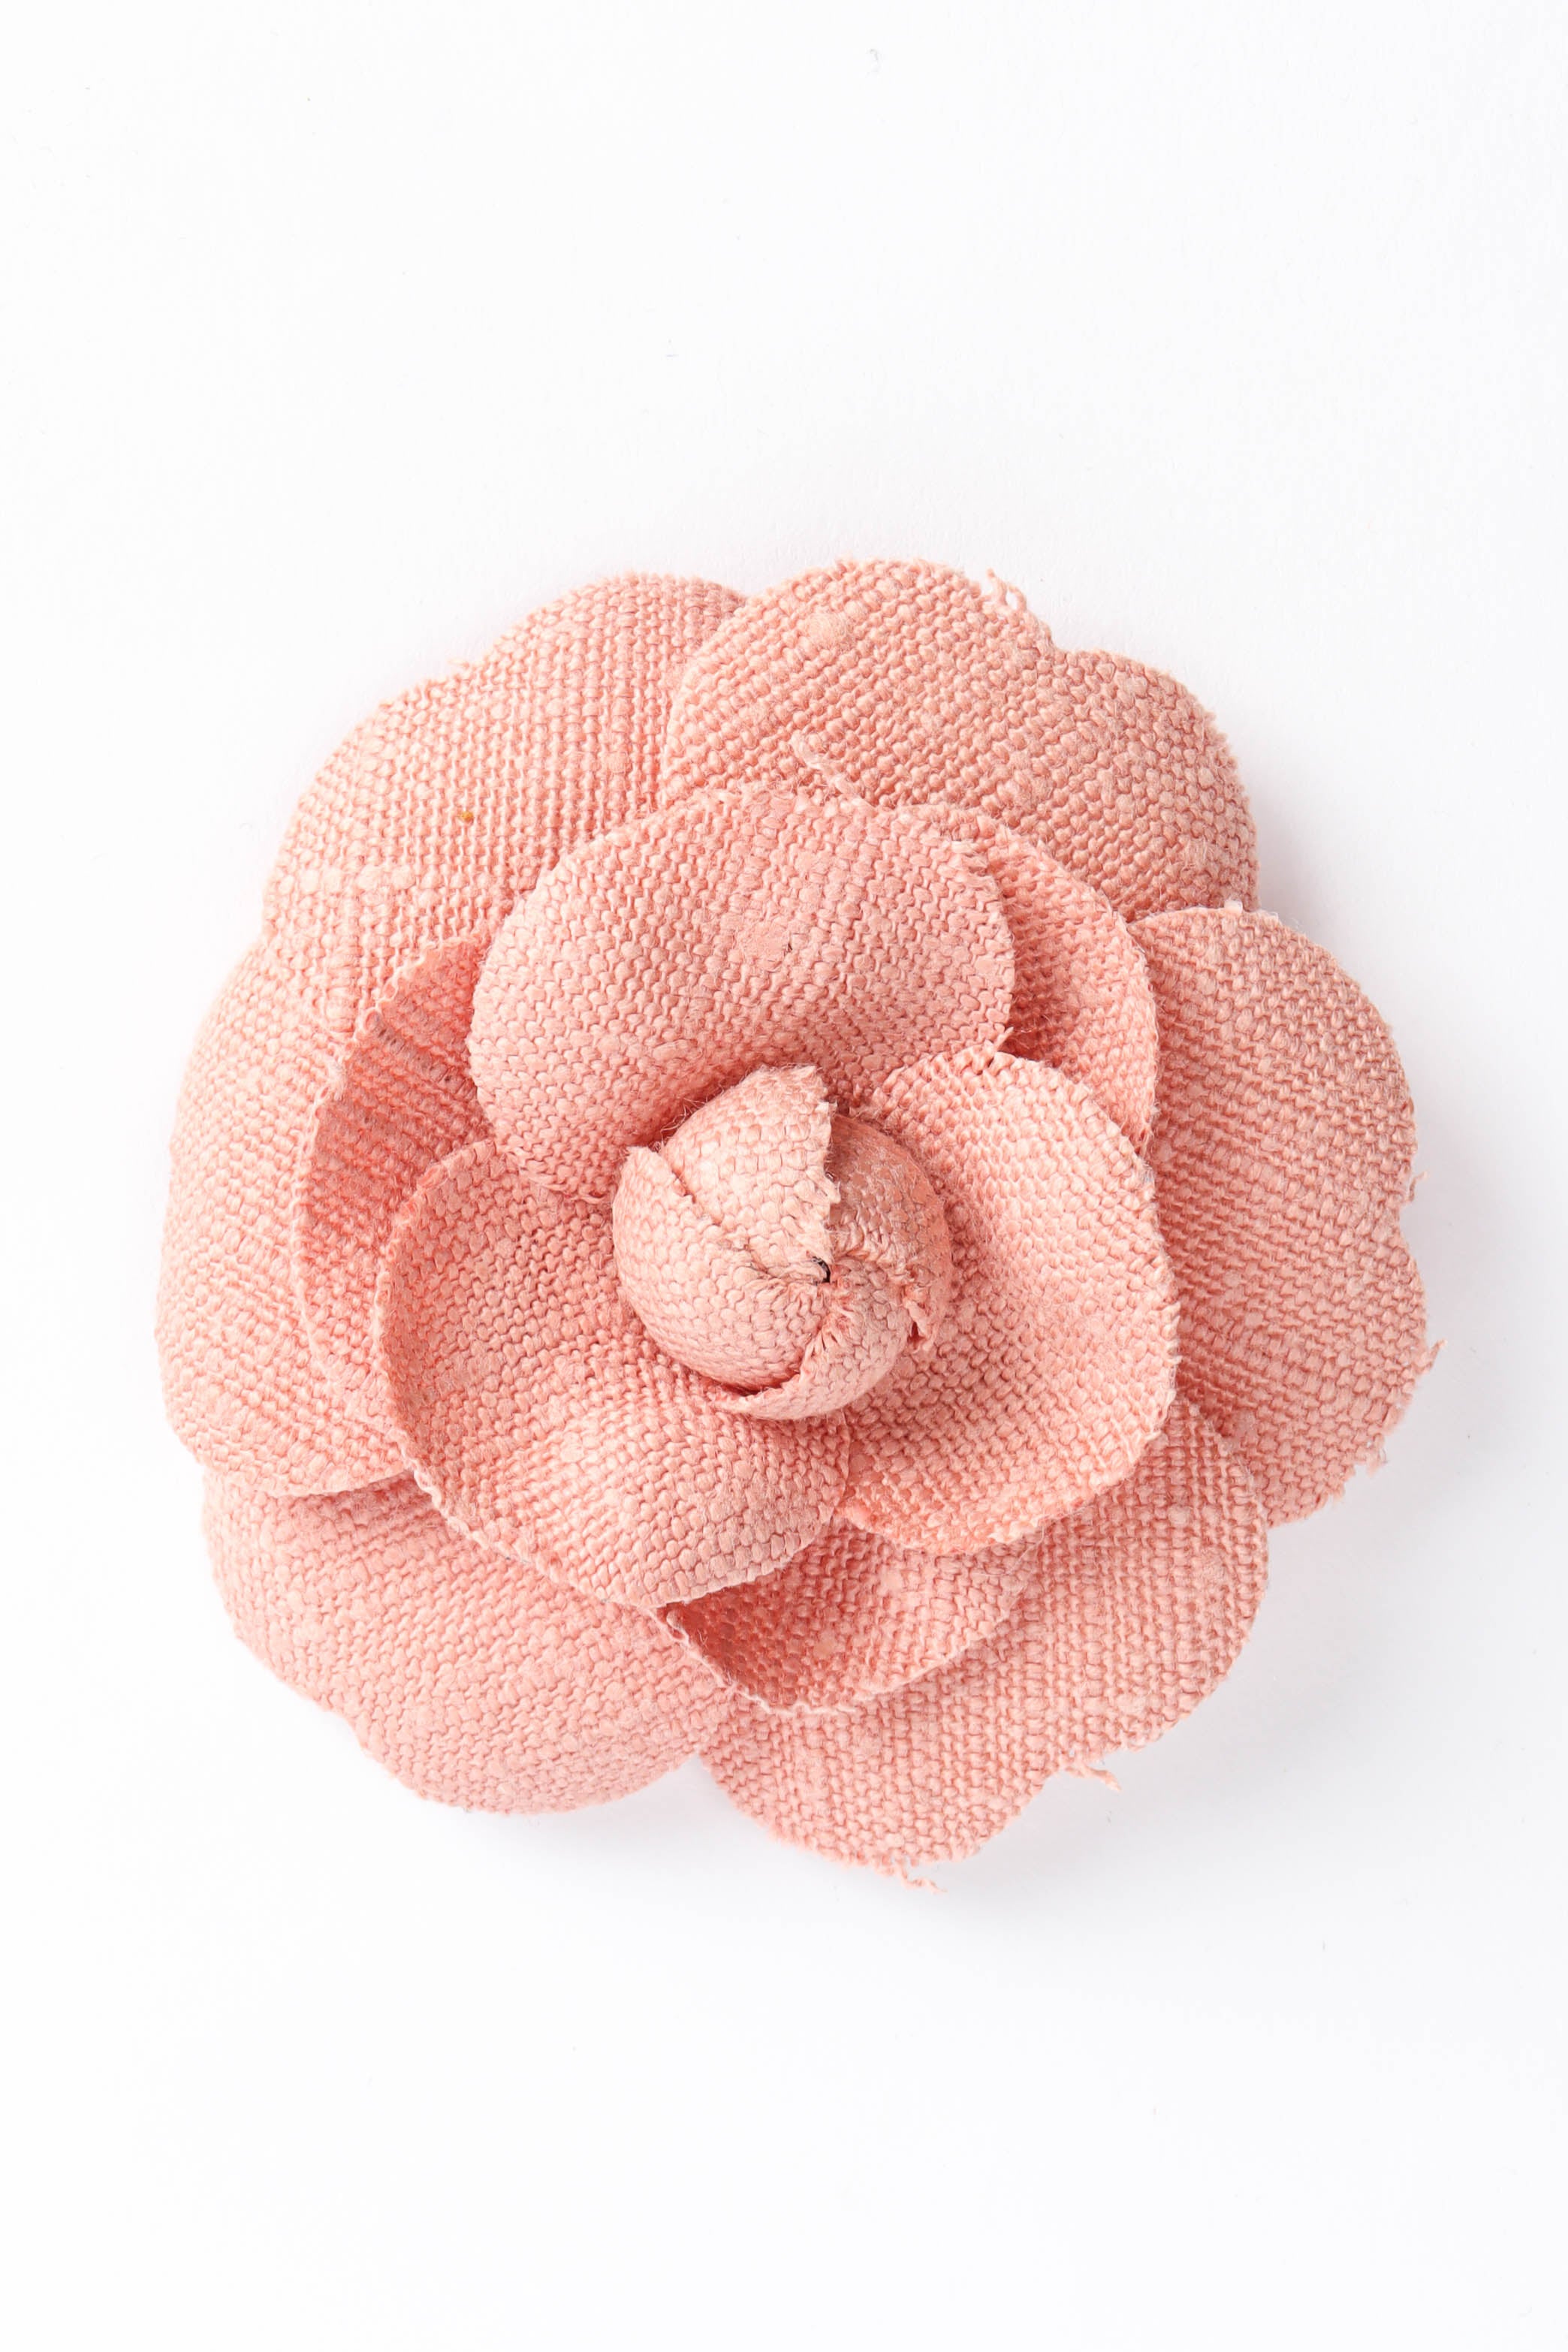 CHANEL, Jewelry, Vintage Chanel Camellia Flower Brooch Pin White